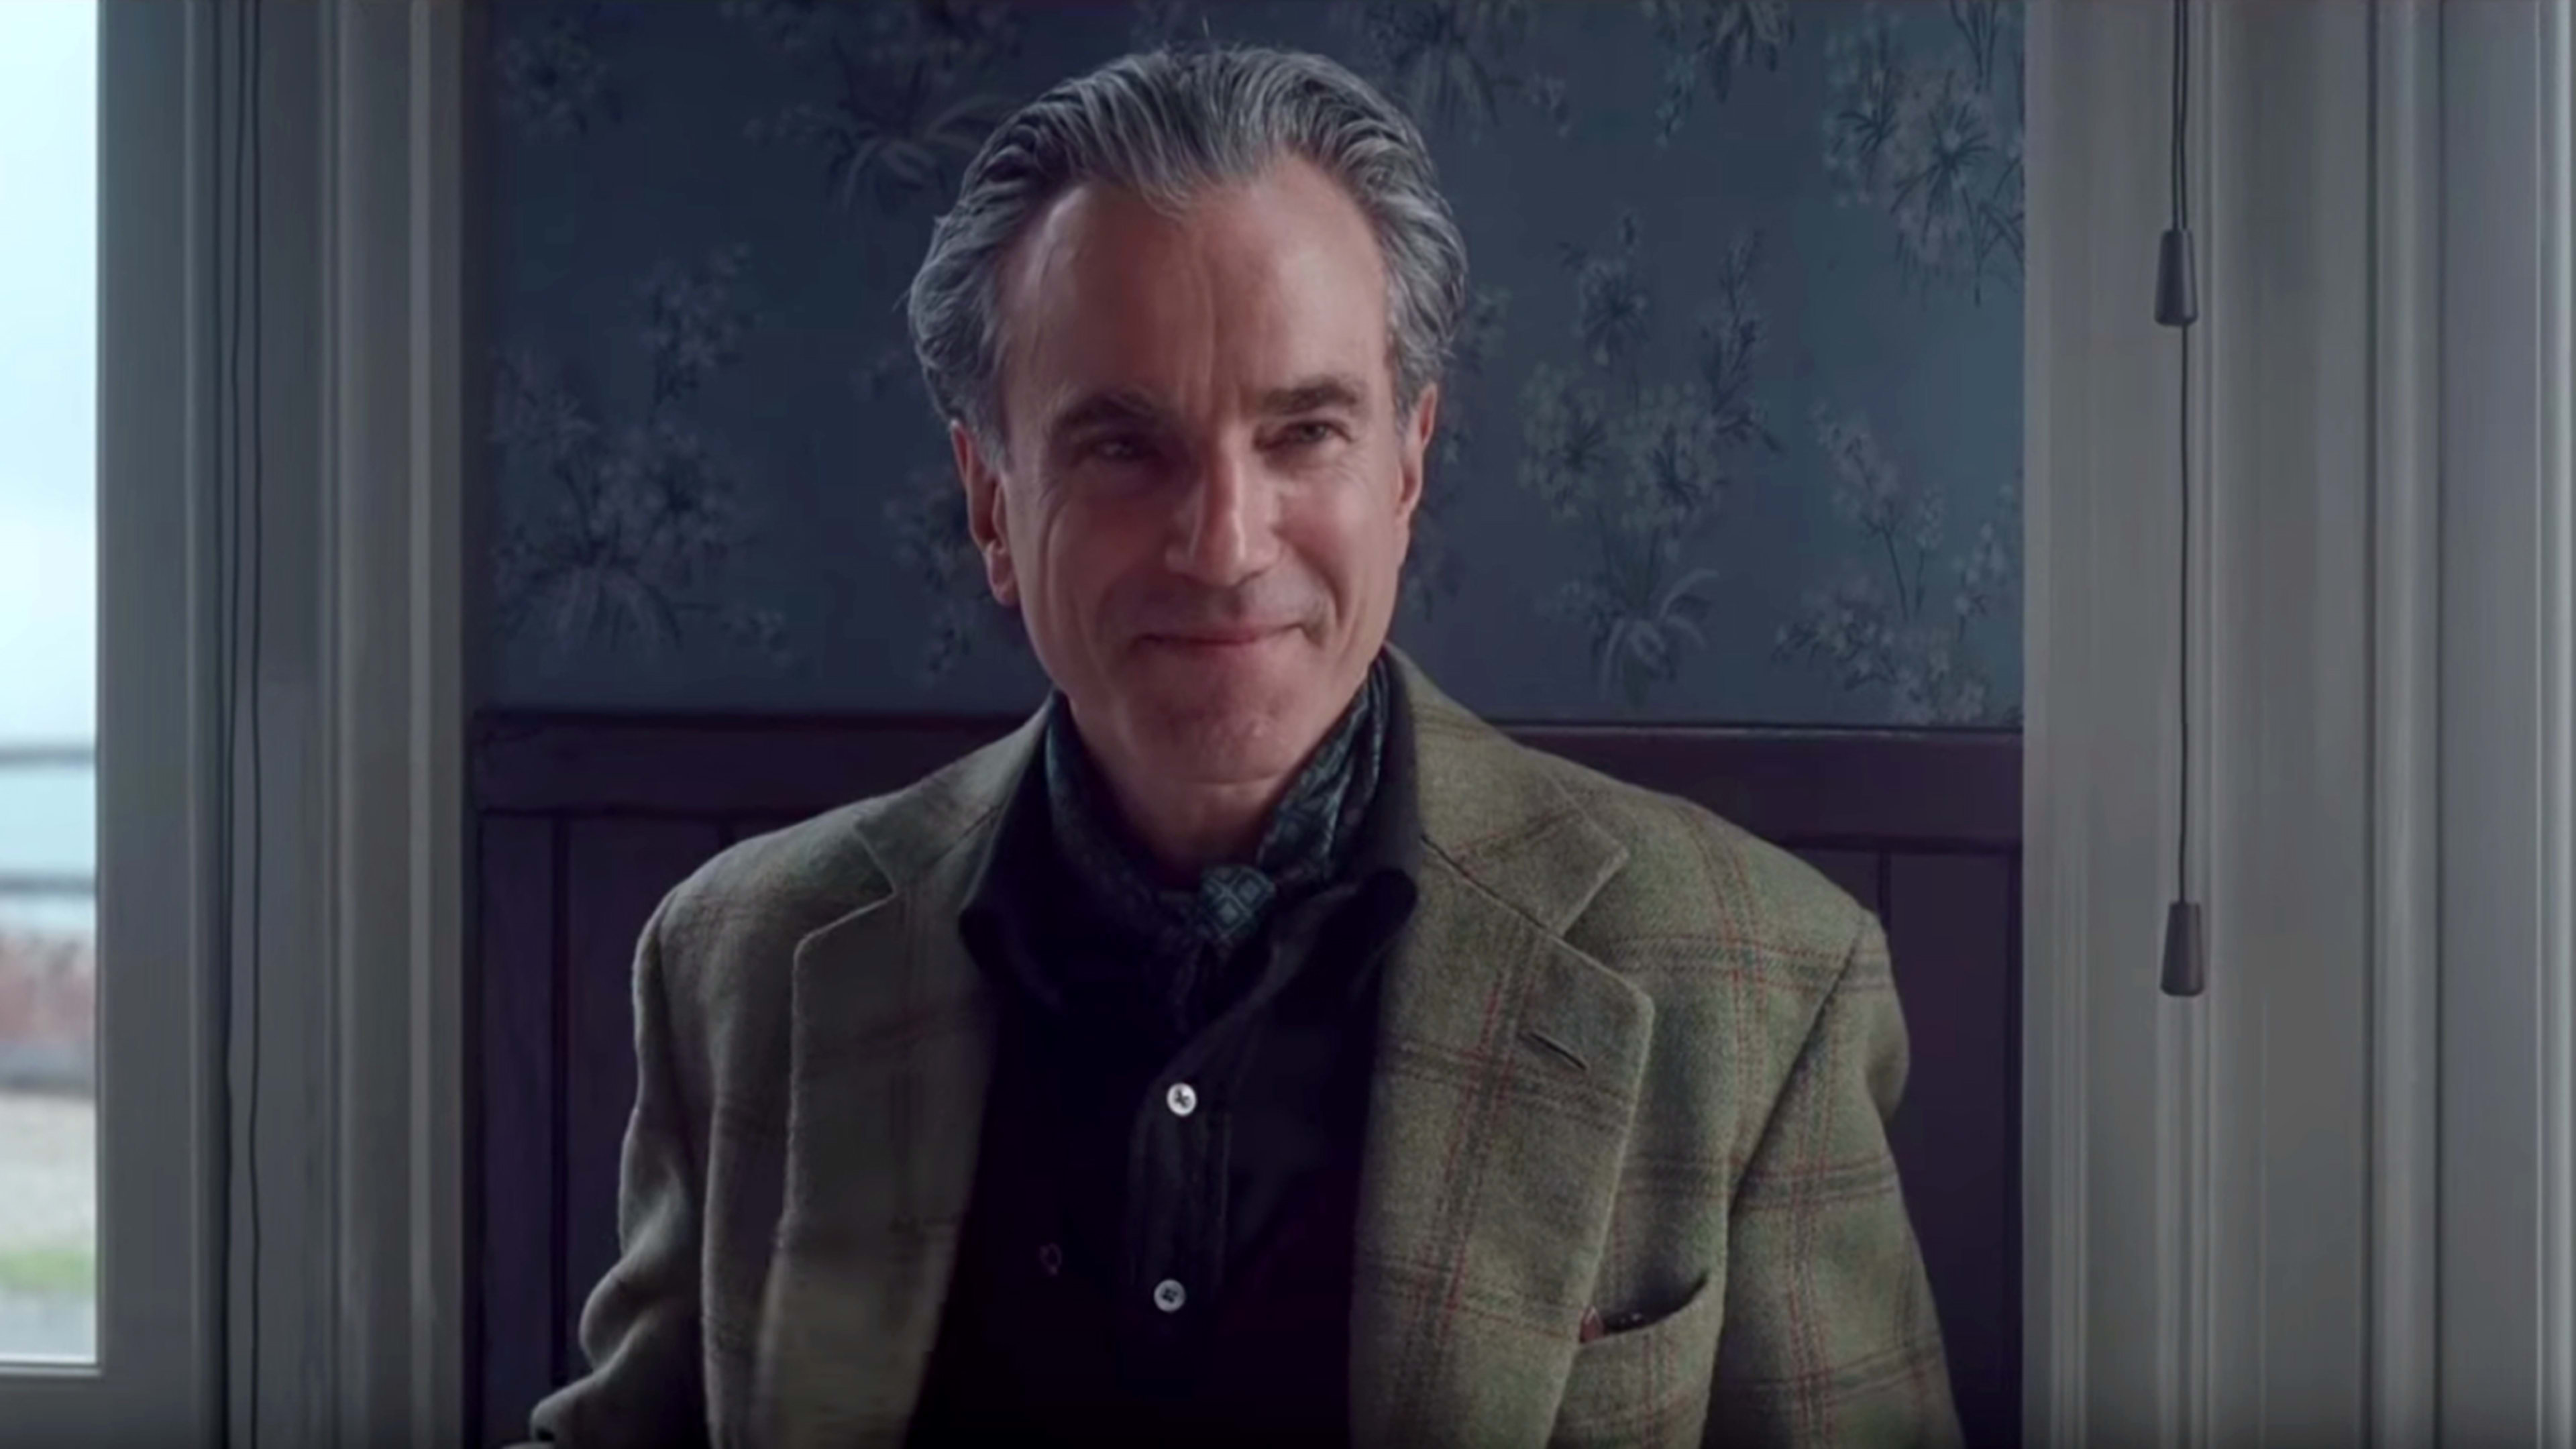 The Trailer For Daniel Day-Lewis’ Final Film Will Make Your Heart Skip A Beat